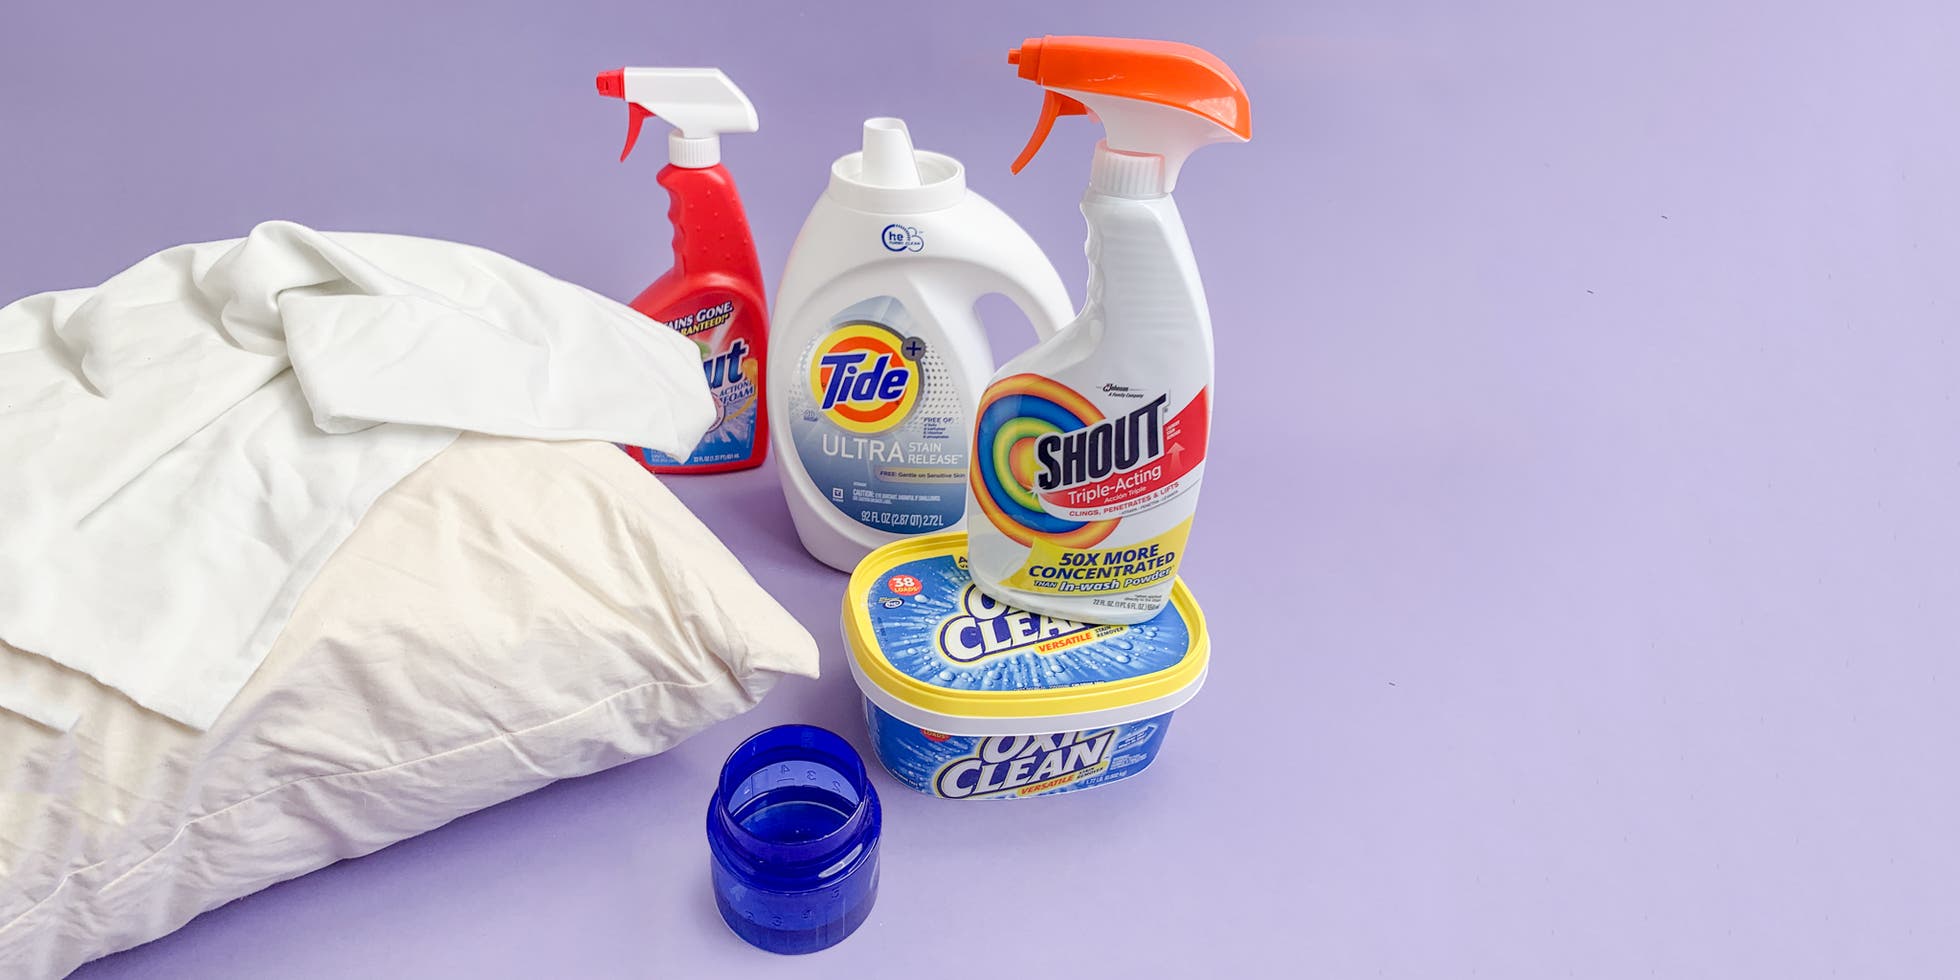 How To Sanitize Pillows After COVID-19